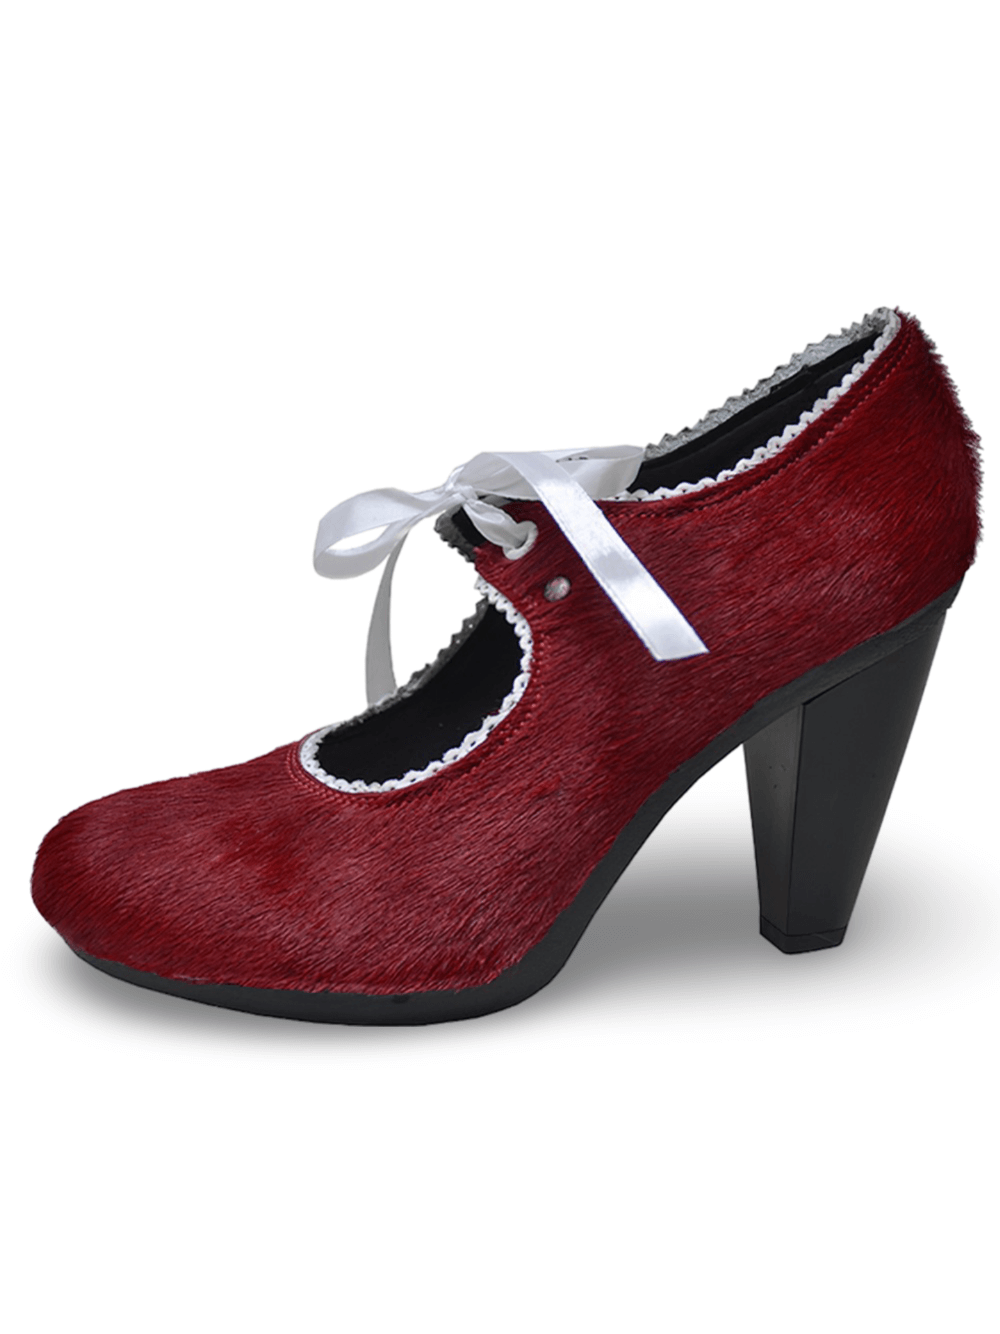 Wine Red Fur And Leather High Heel Pumps With White Lacing